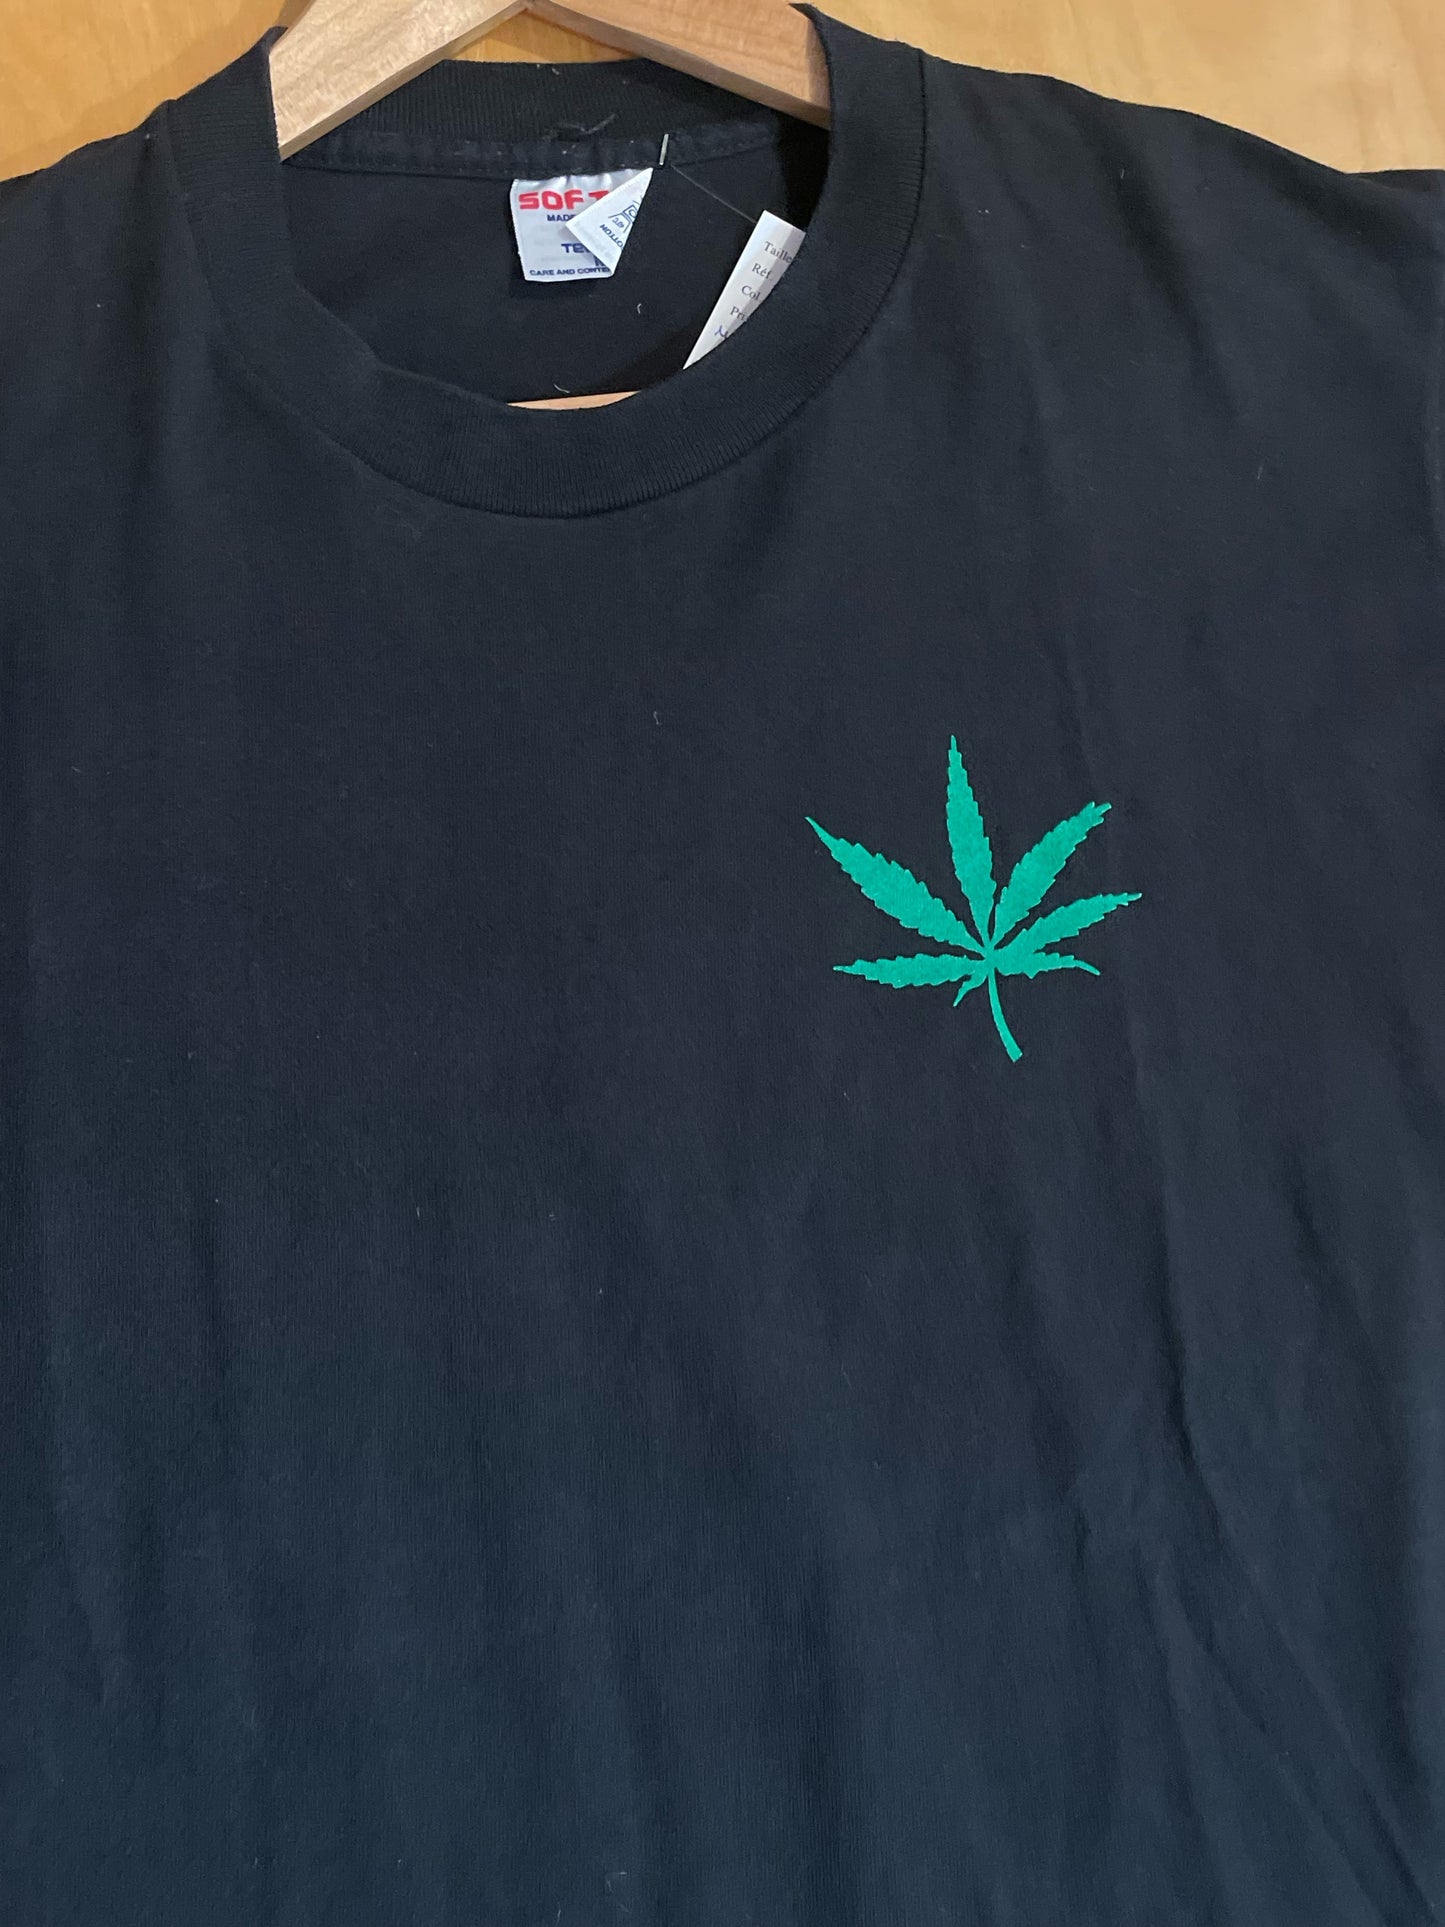 VINTAGE 90s CANNABIS LEAVE "A FRIEND WITH WEED IS A FRIEND INDEED!" T-SHIRT  SZ: M